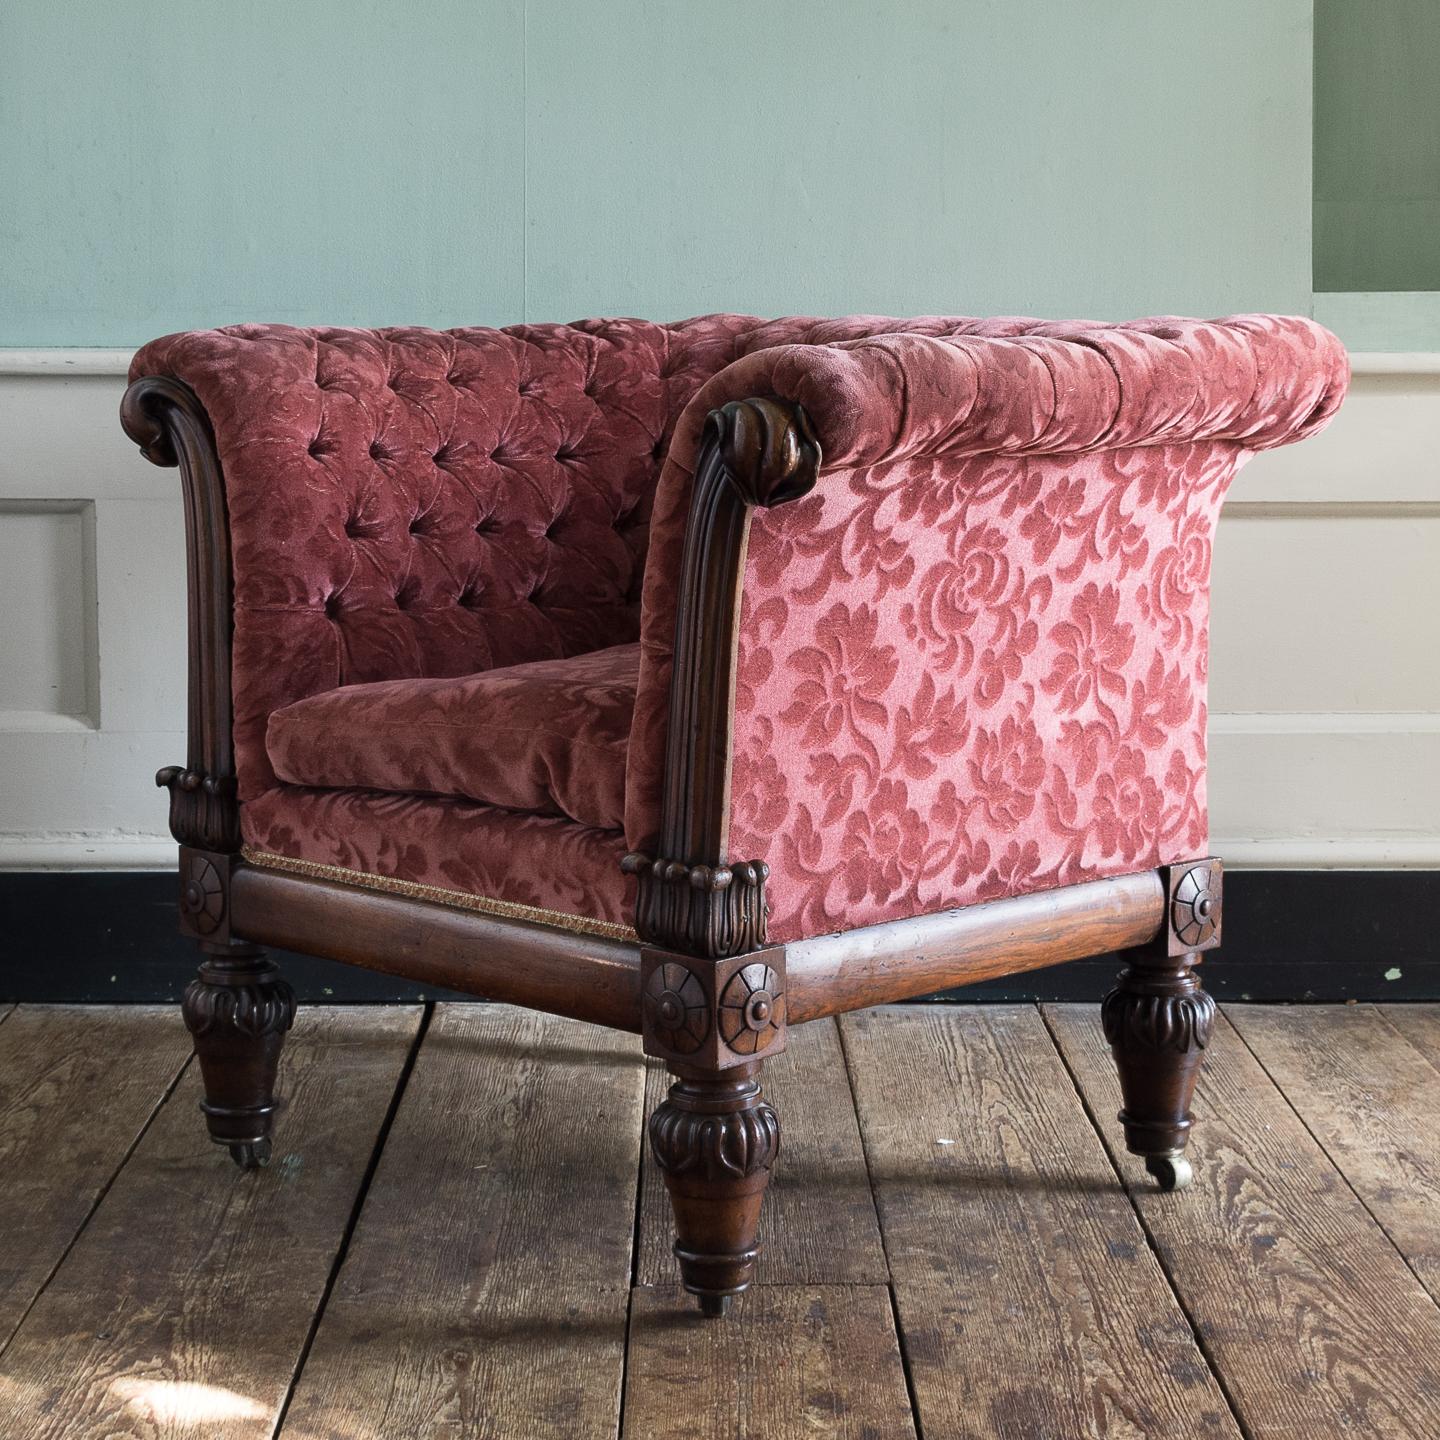 A substantial William IV period rosewood framed armchair, with velvet button back upholstery and squab cushion.

This large and imposing armchair has upholstery that whilst not being new is in thoroughly acceptable order. There is some very slight